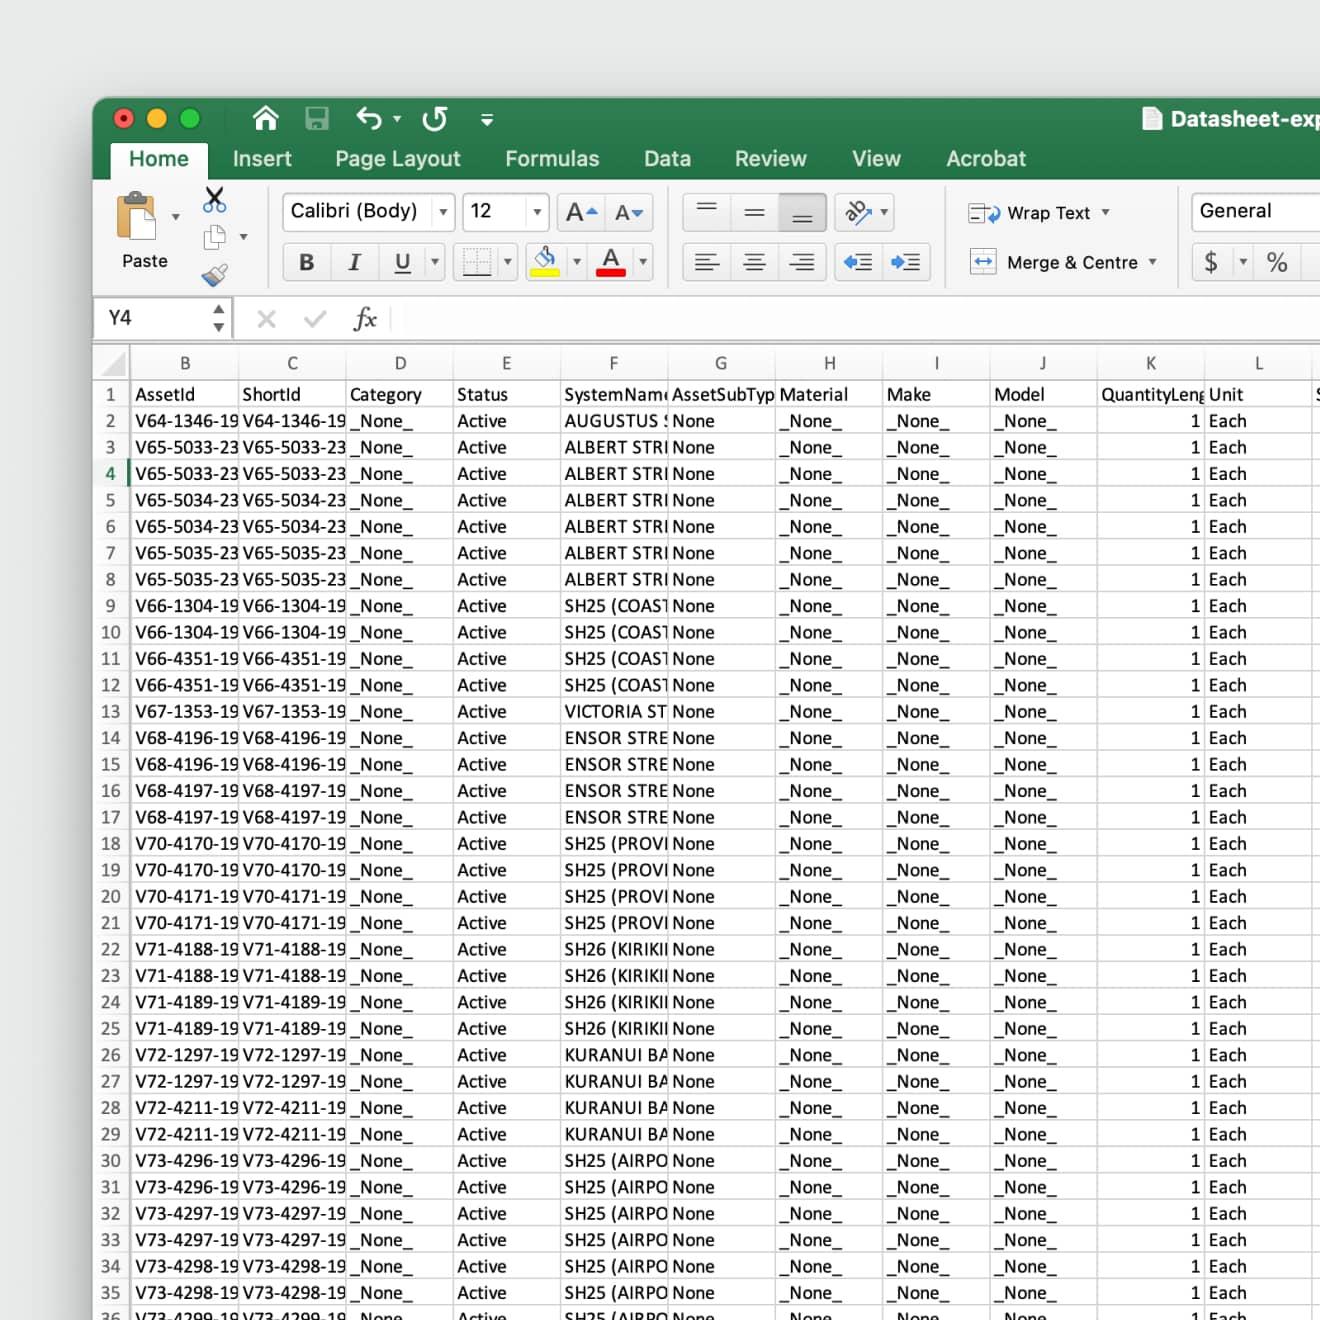 Raw data in a spreadsheet to be migrated via portal